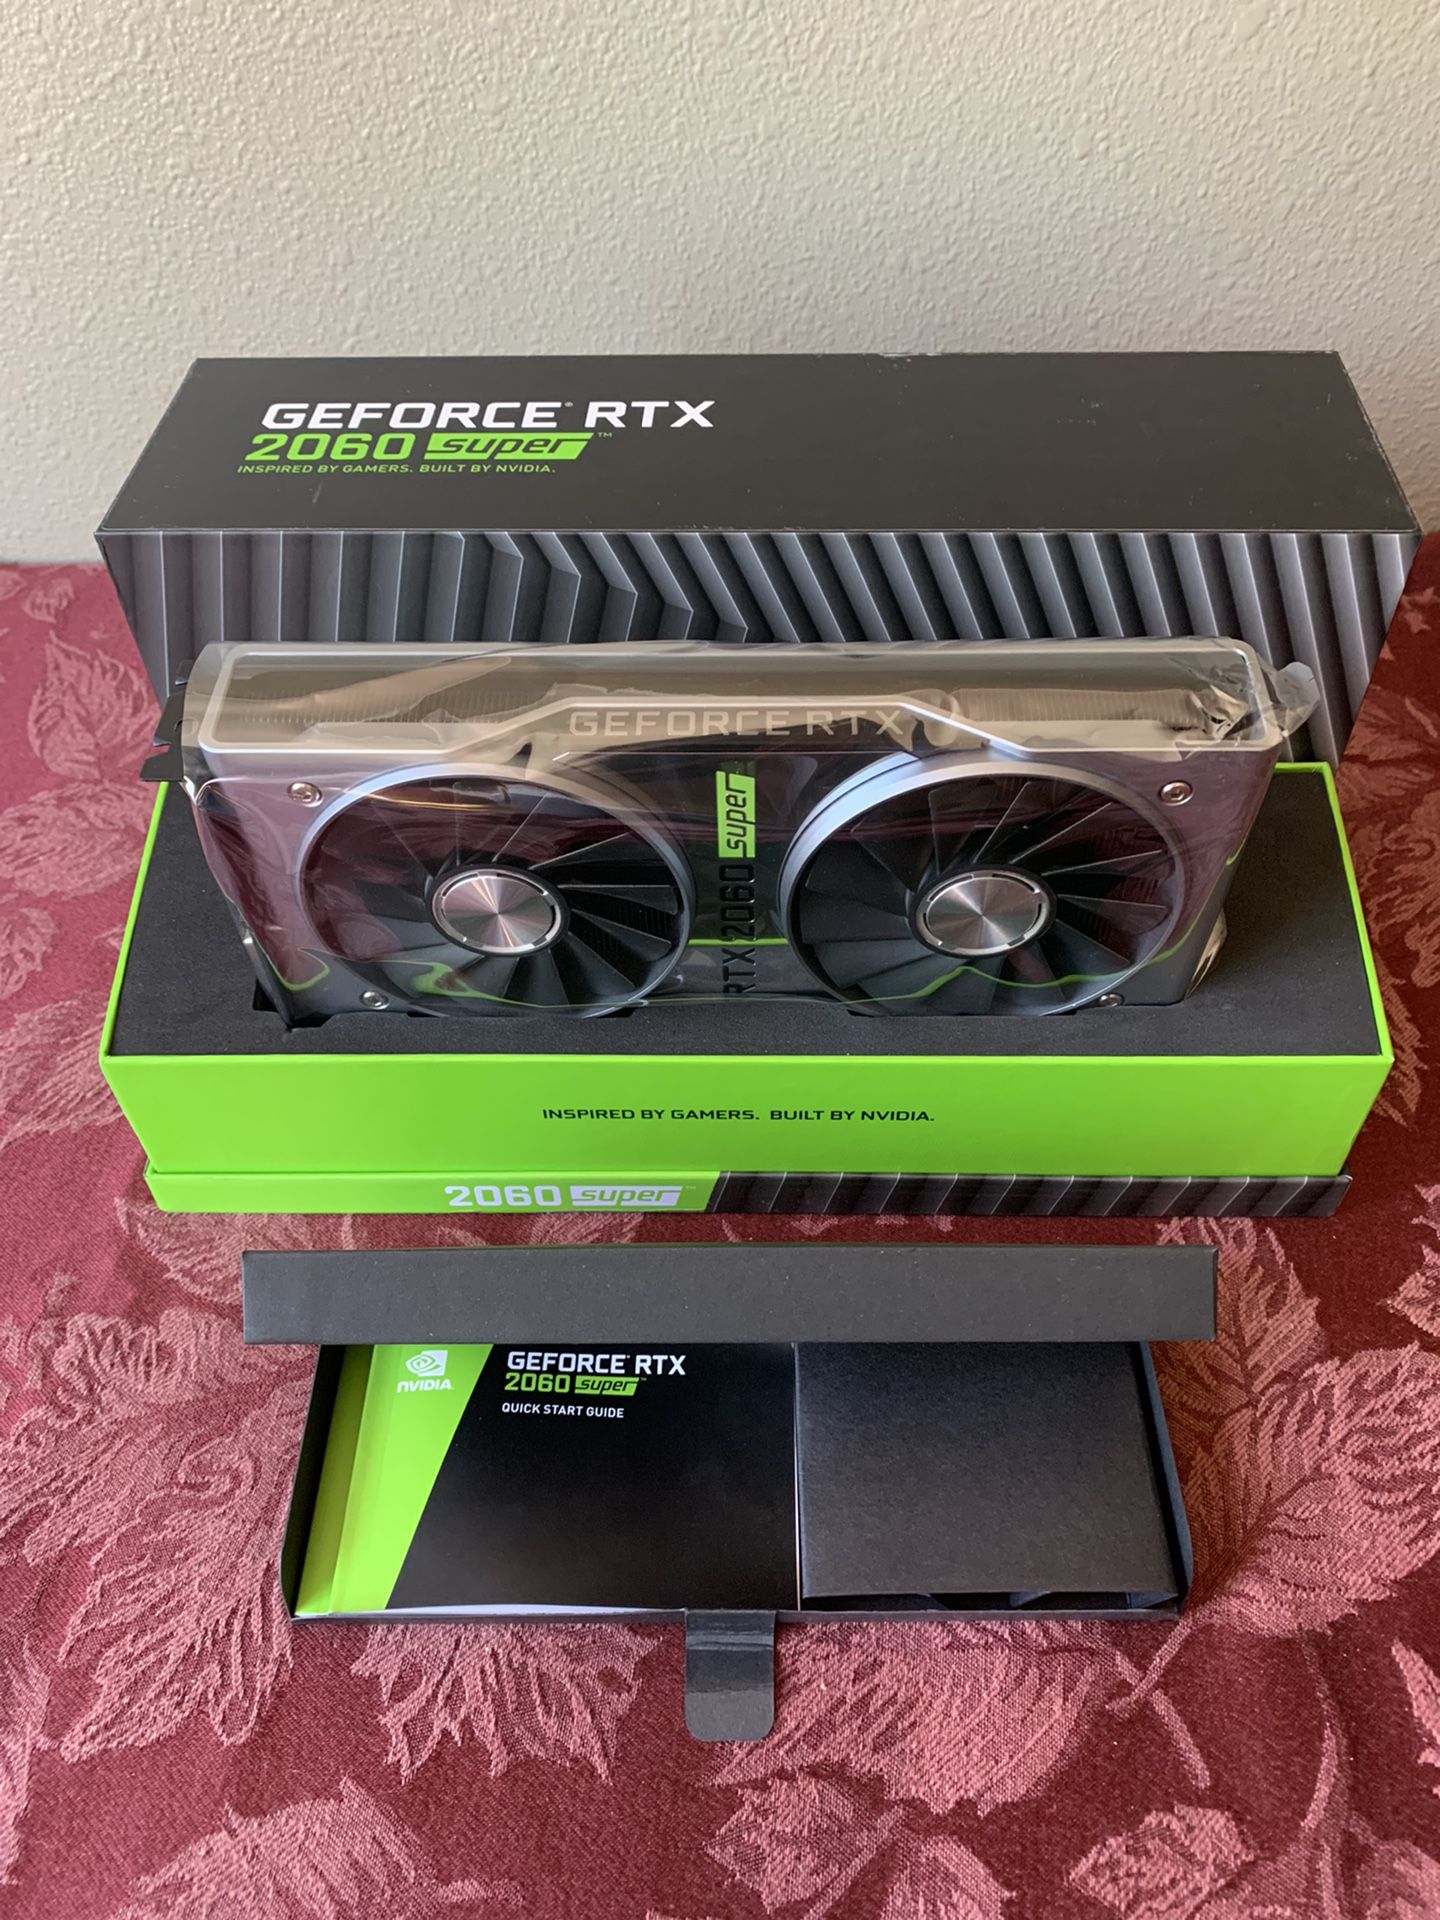 Nvidia GeForce RTX 2060 Super Founders Edition FE for Sale in Glendora, CA  - OfferUp